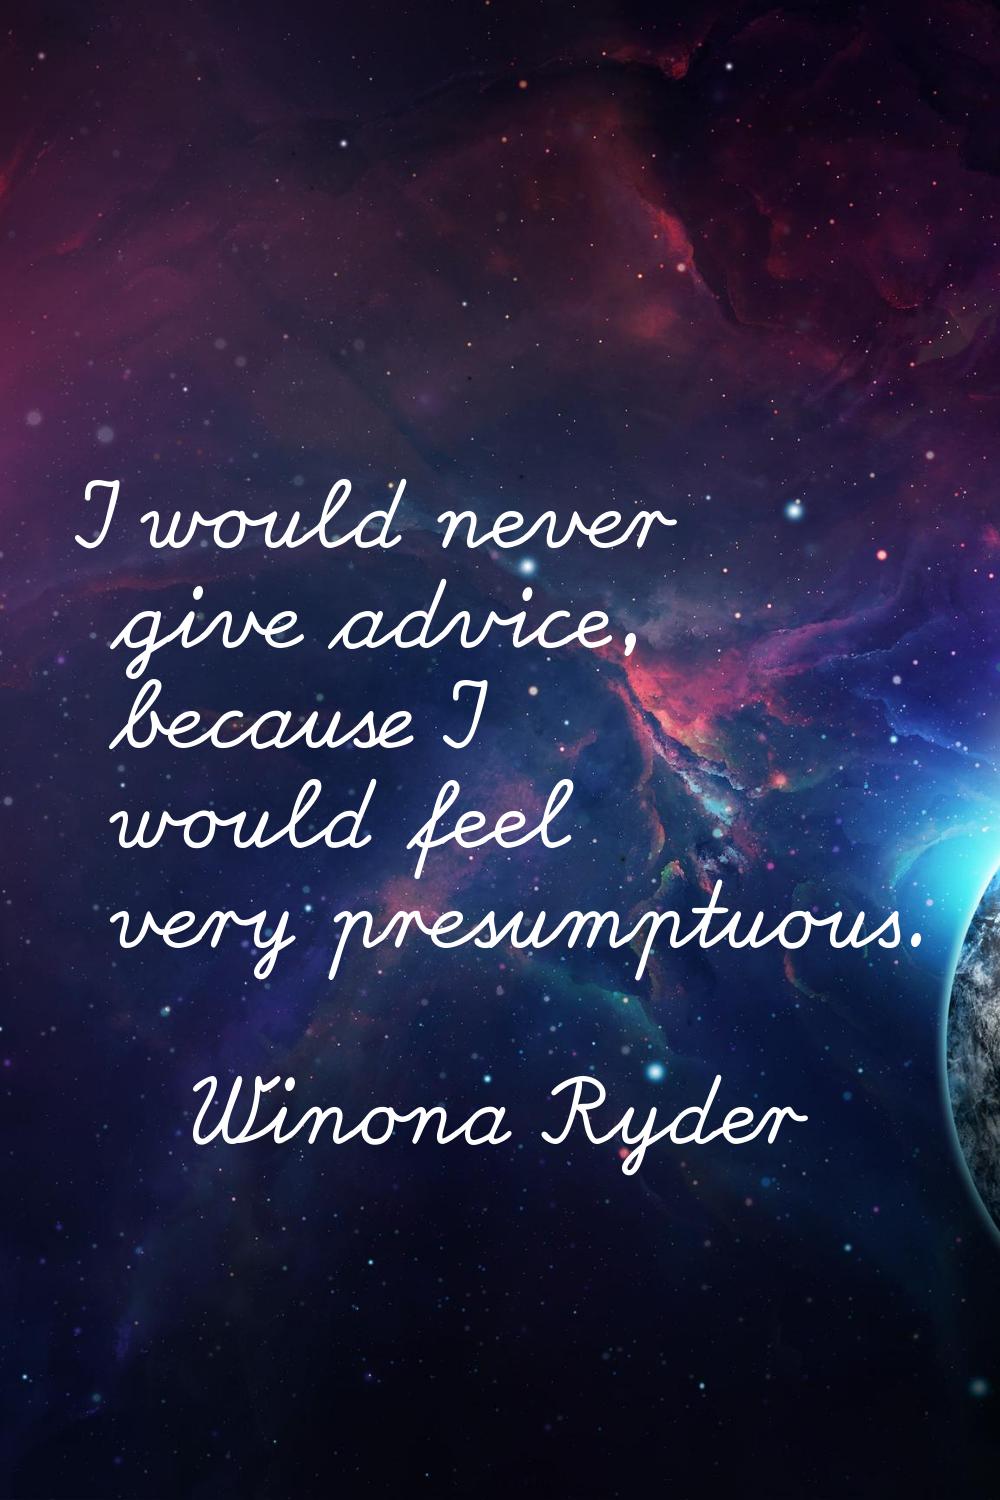 I would never give advice, because I would feel very presumptuous.